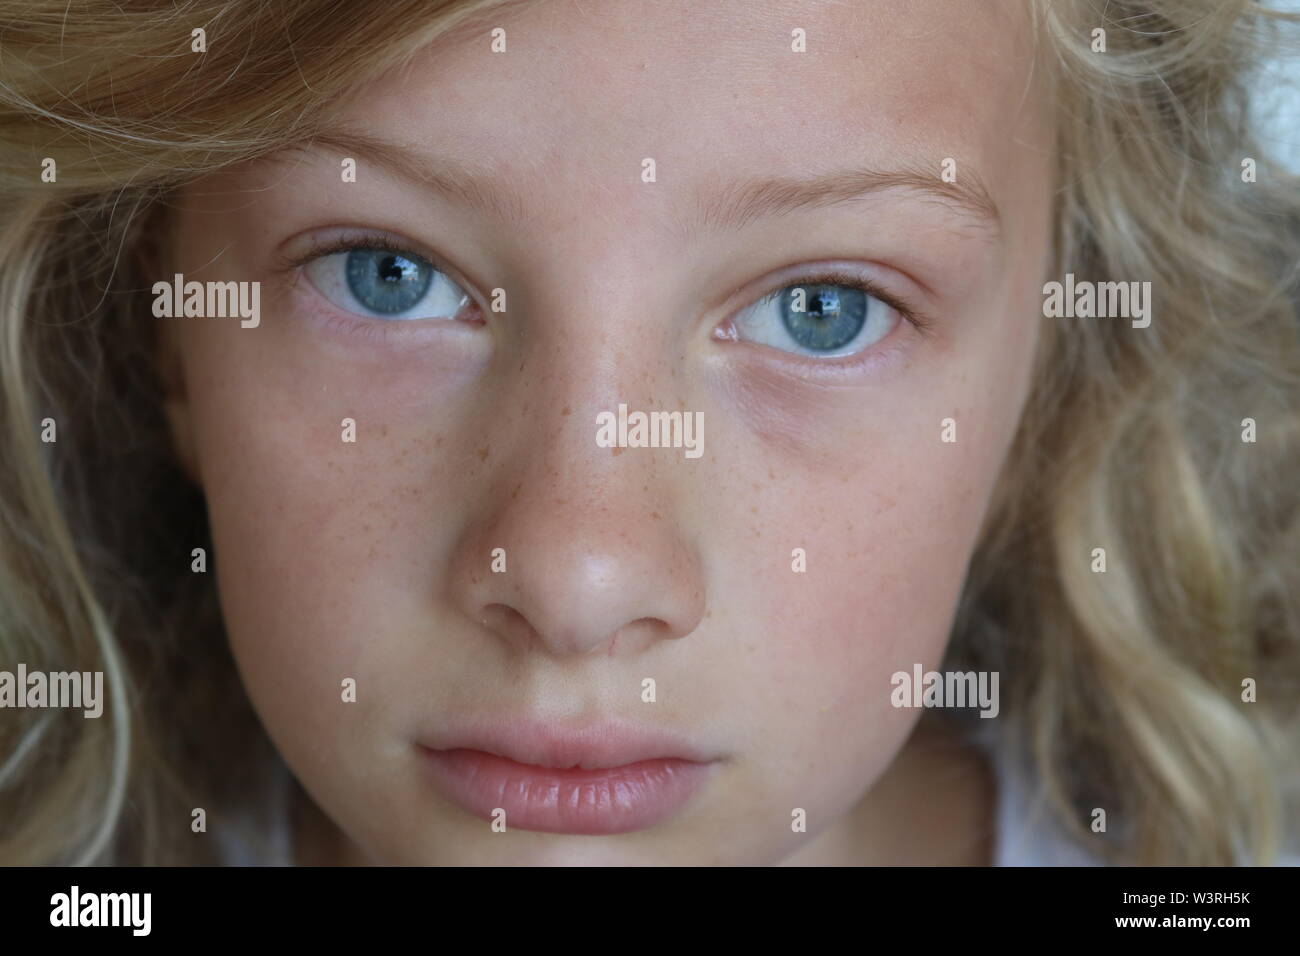 Closeup of a beautiful preteen girl with blue eyes and a sad, serious stare Stock Photo